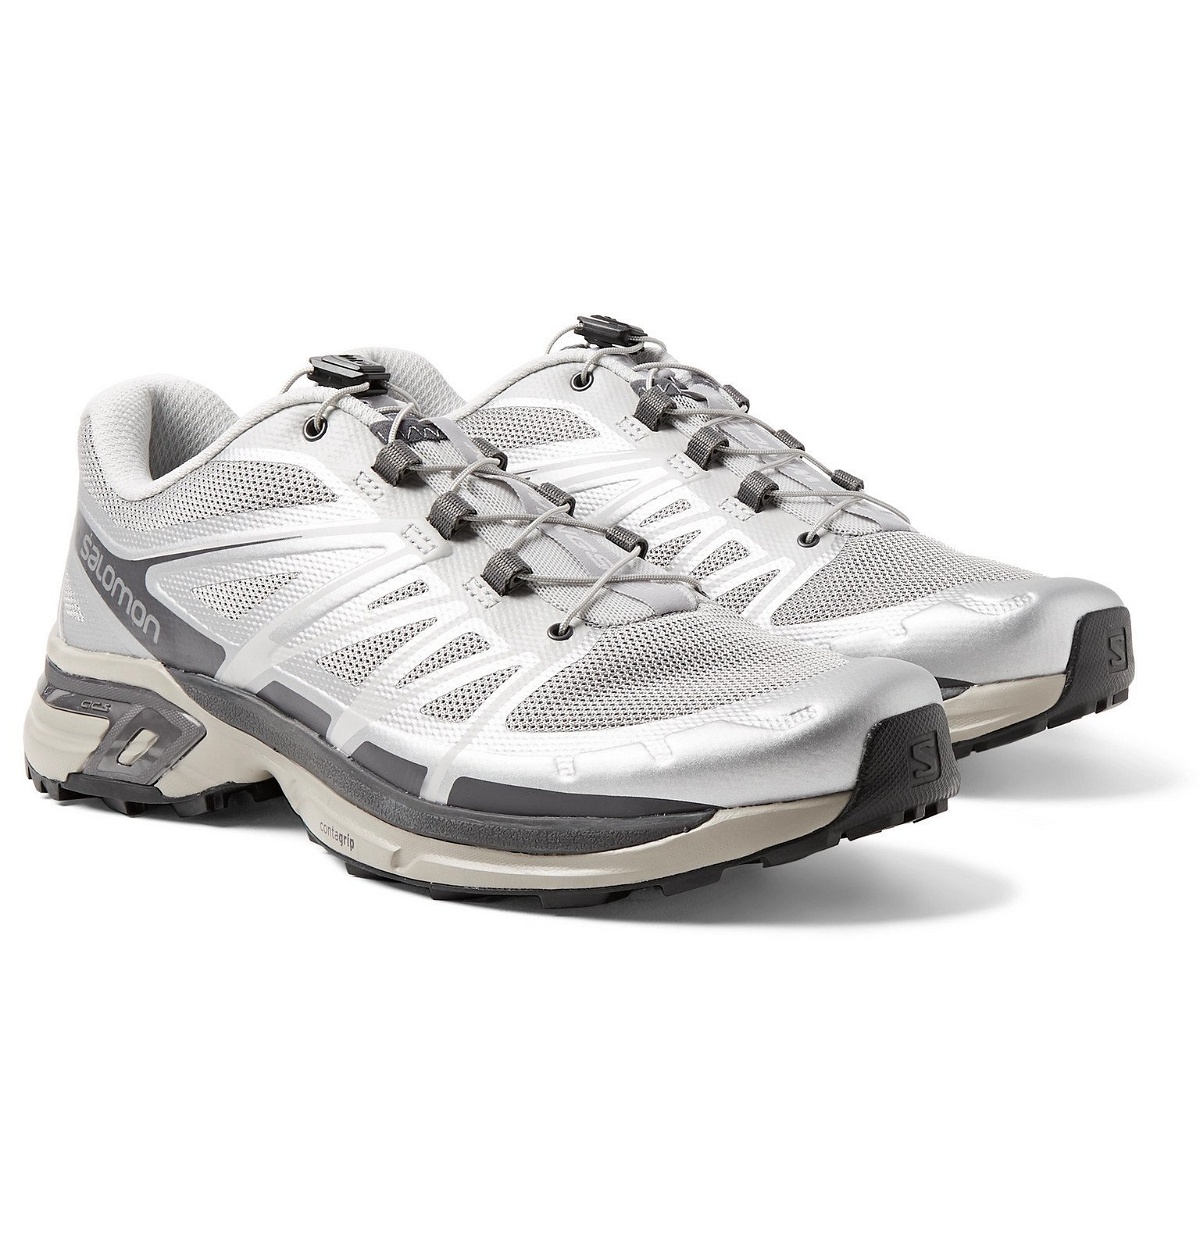 Salomon - XT-Wings 2 ADV Mesh and Rubber Running Shoes - Silver